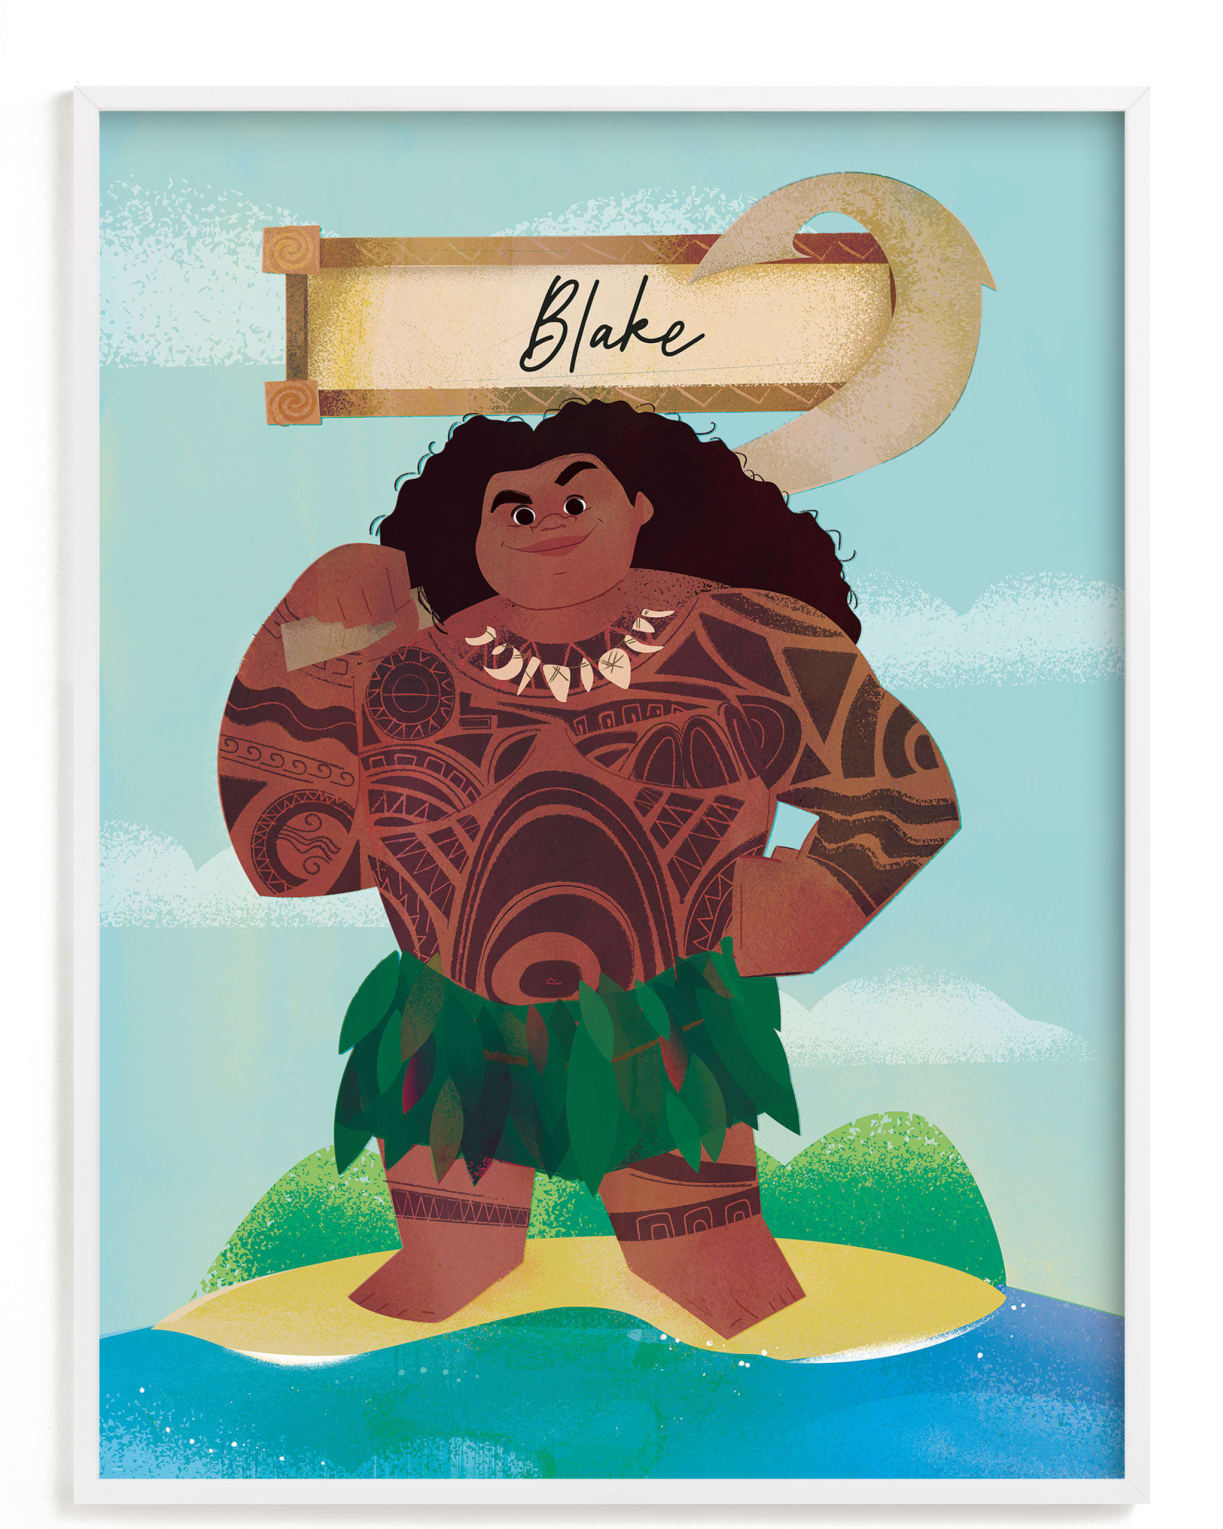 This is a blue disney art by Lori Wemple called Maui the Wayfinder | Moana.